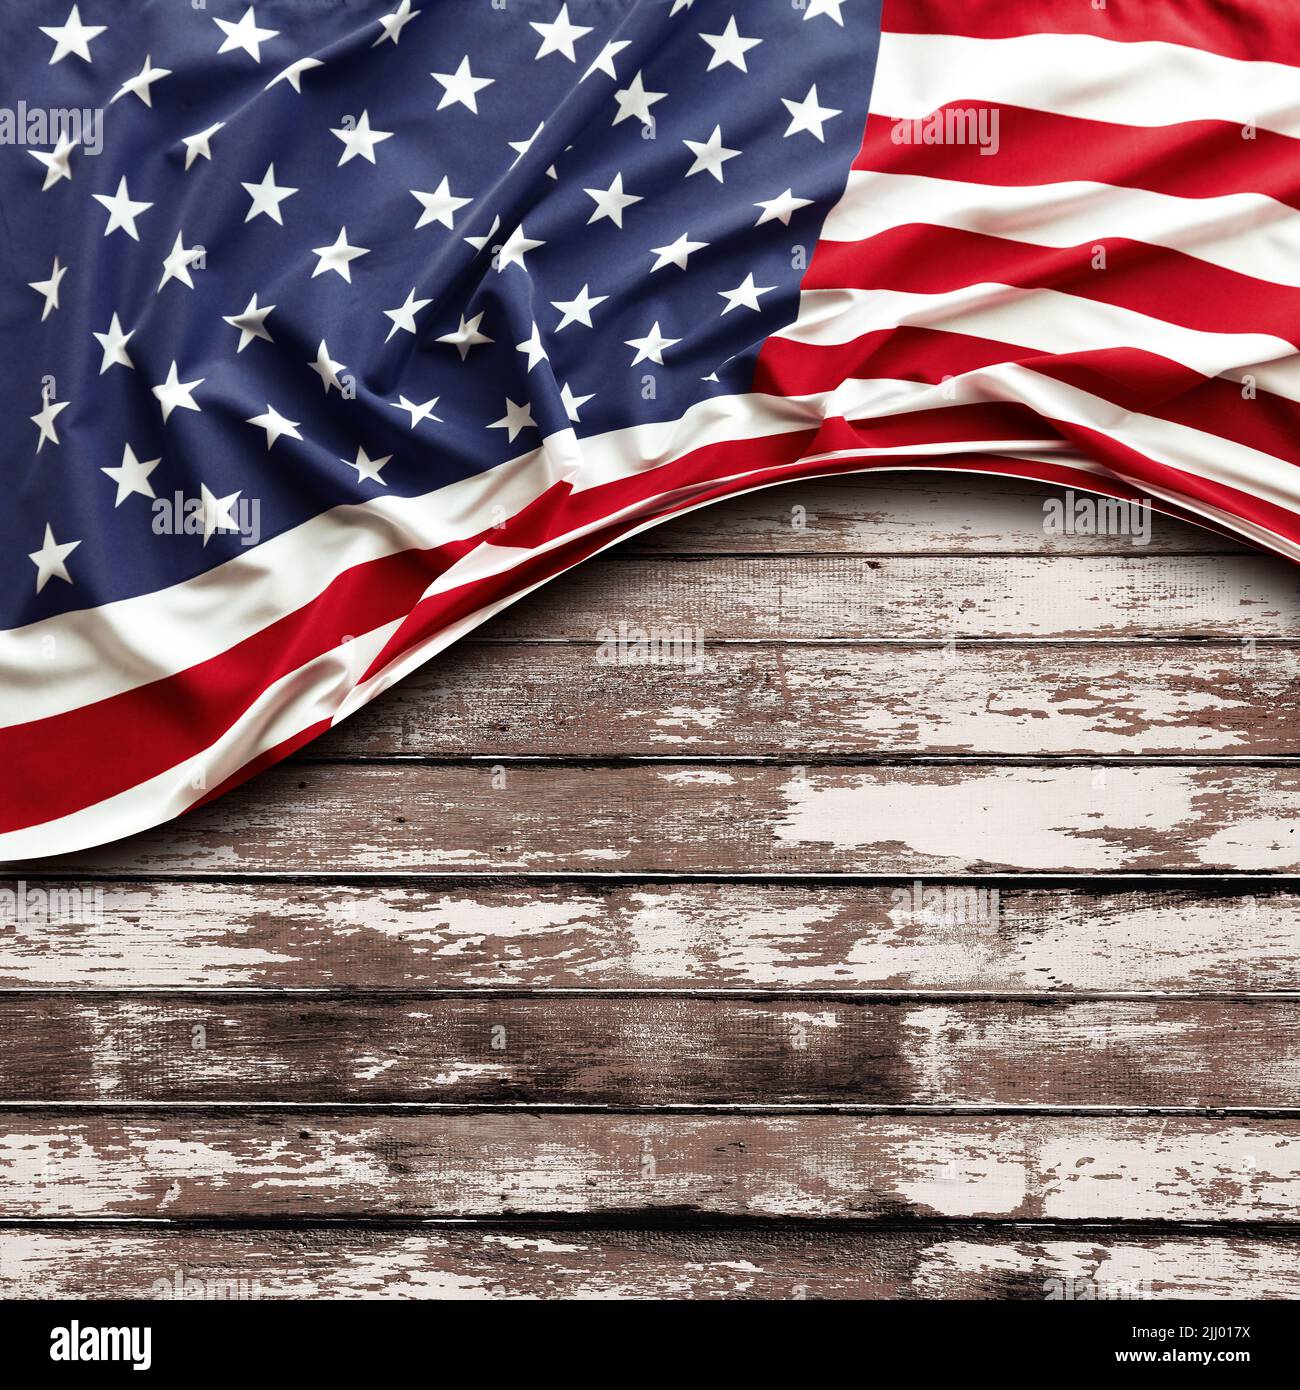 American flag and wooden boards Stock Photo